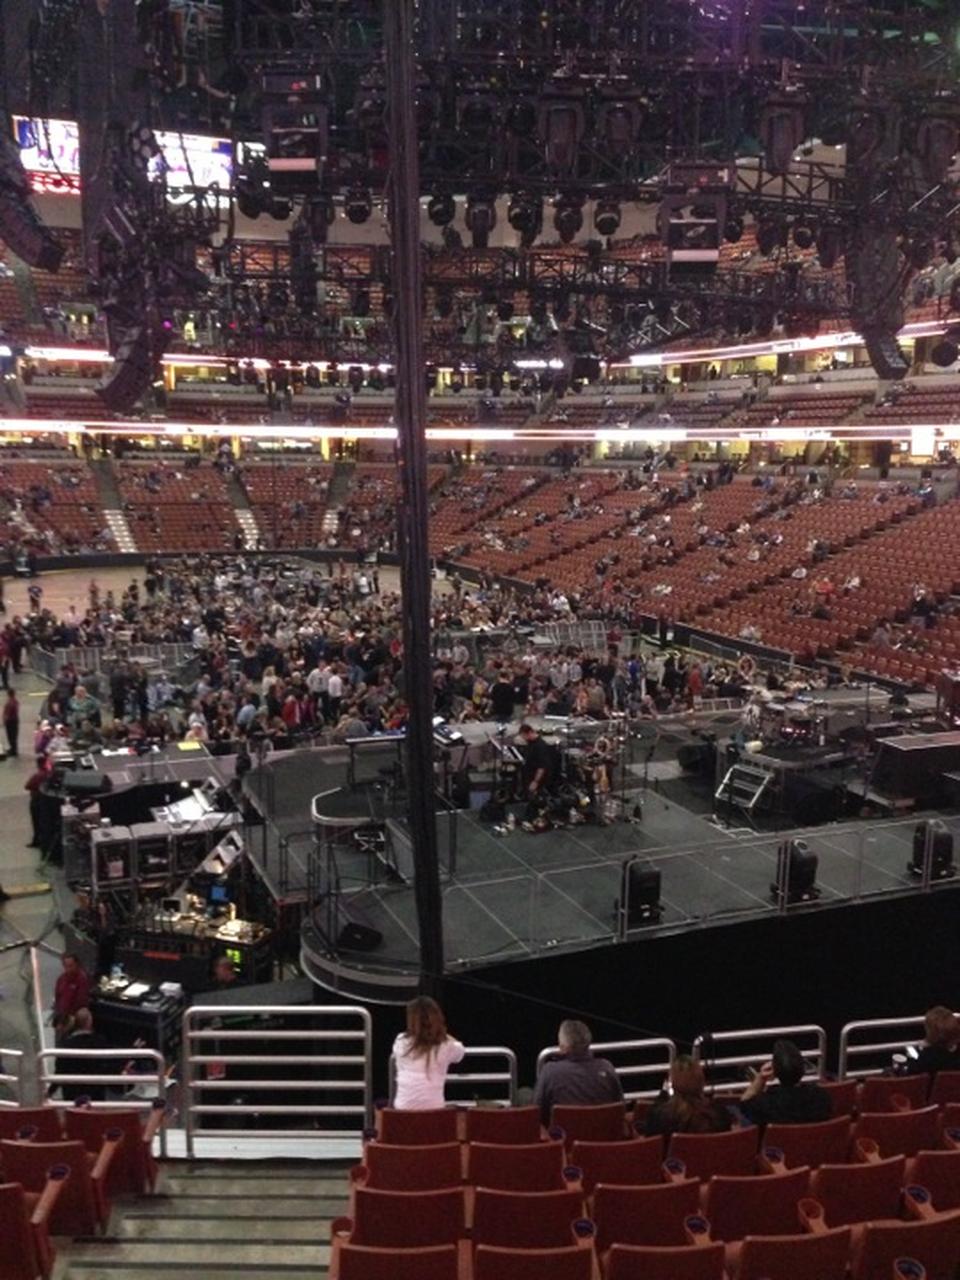 section 217 seat view  for concert - honda center